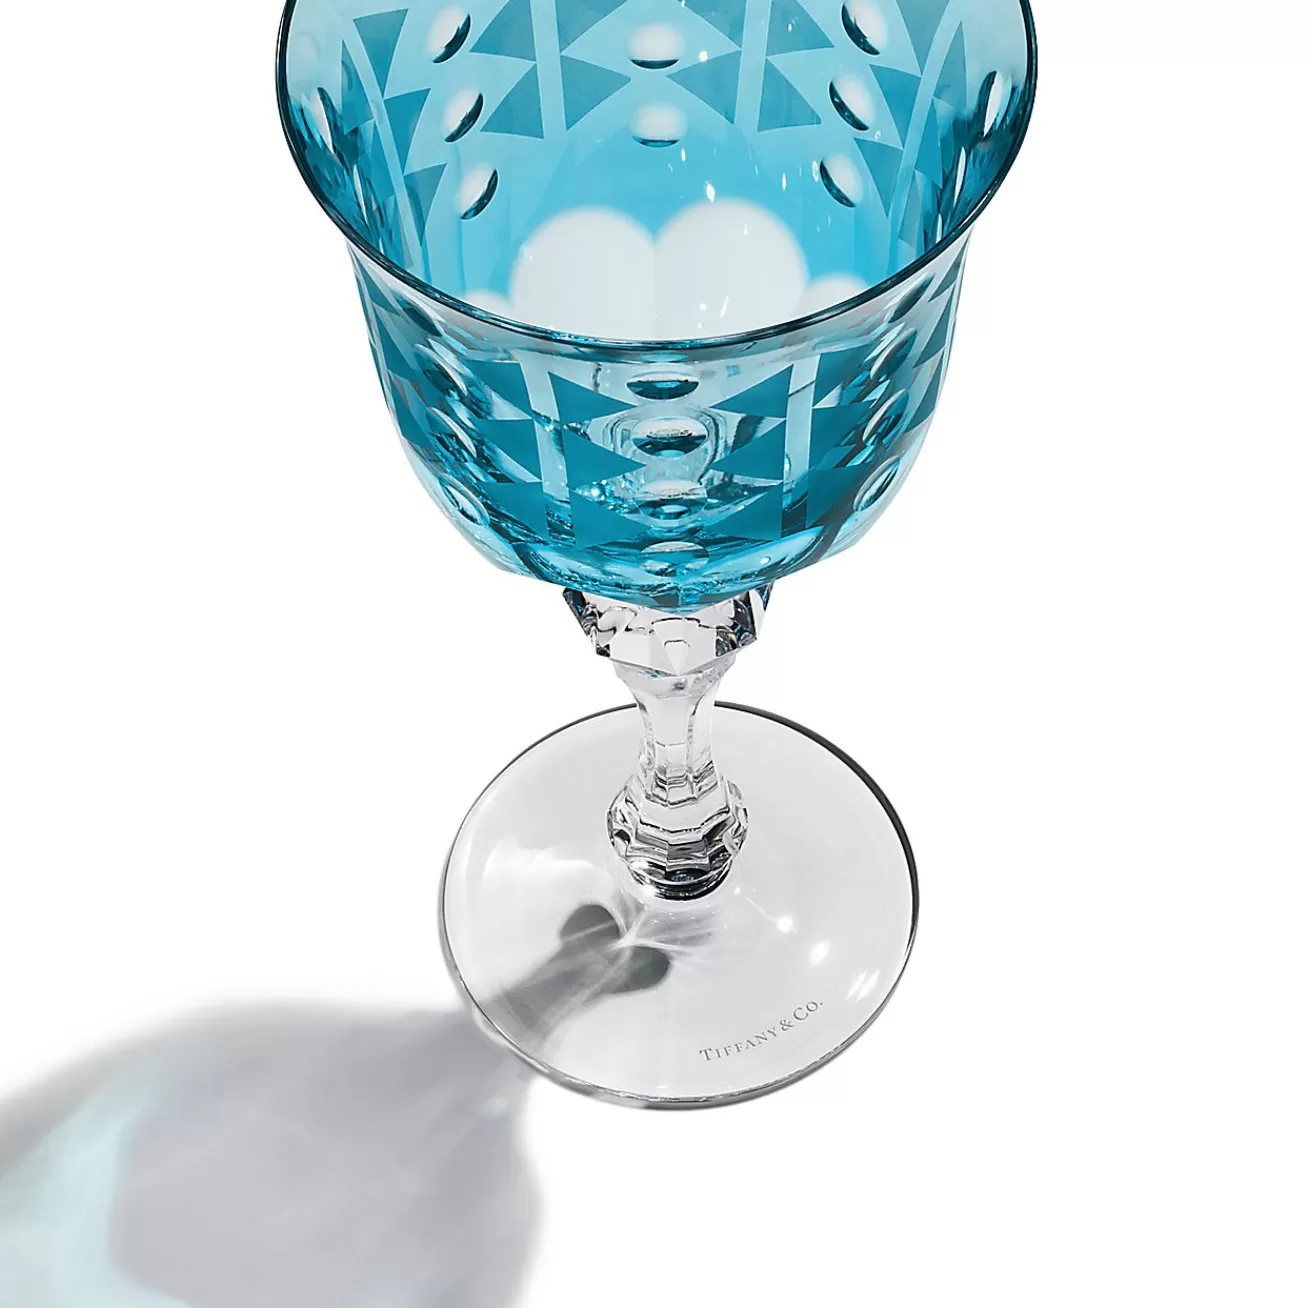 Tiffany & Co. Tiffany Berries Red Wine Glass in Tiffany Blue® Lead Crystal | ^ The Home | Housewarming Gifts